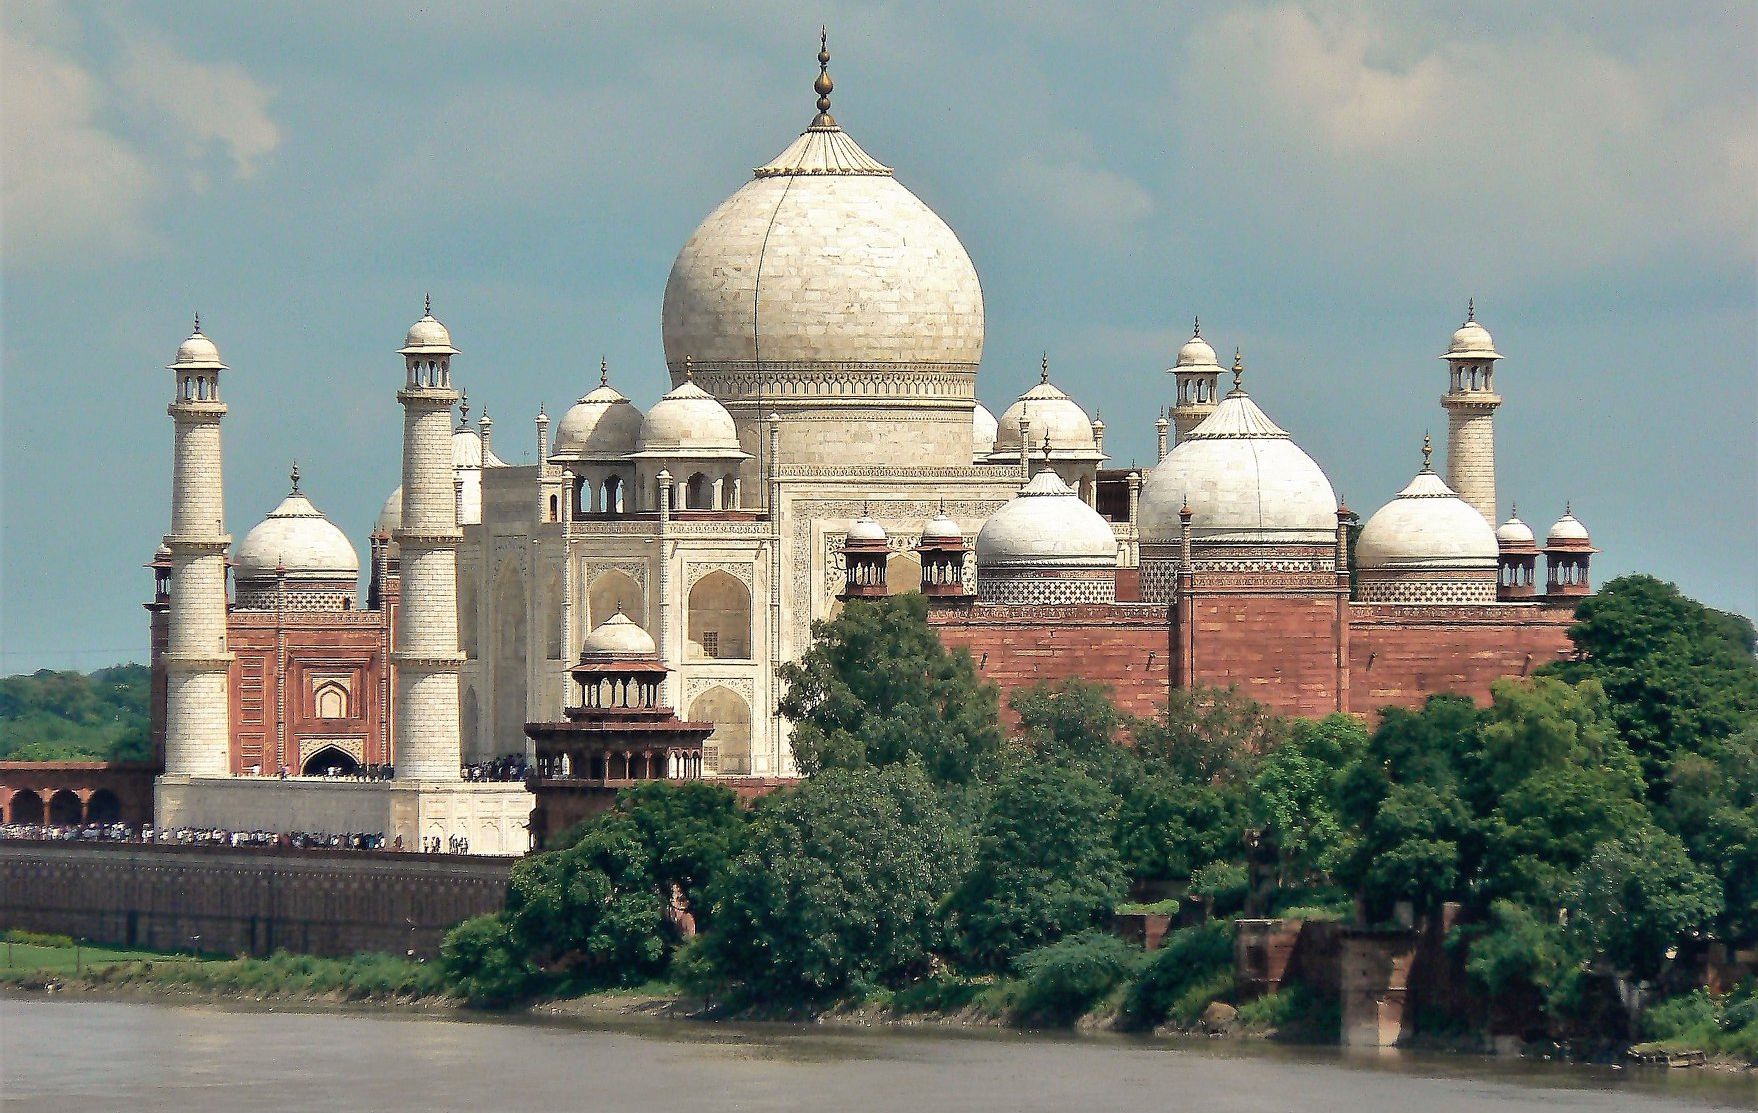 Taj Mahal in Agra, India - the finest example of Mughal architecture